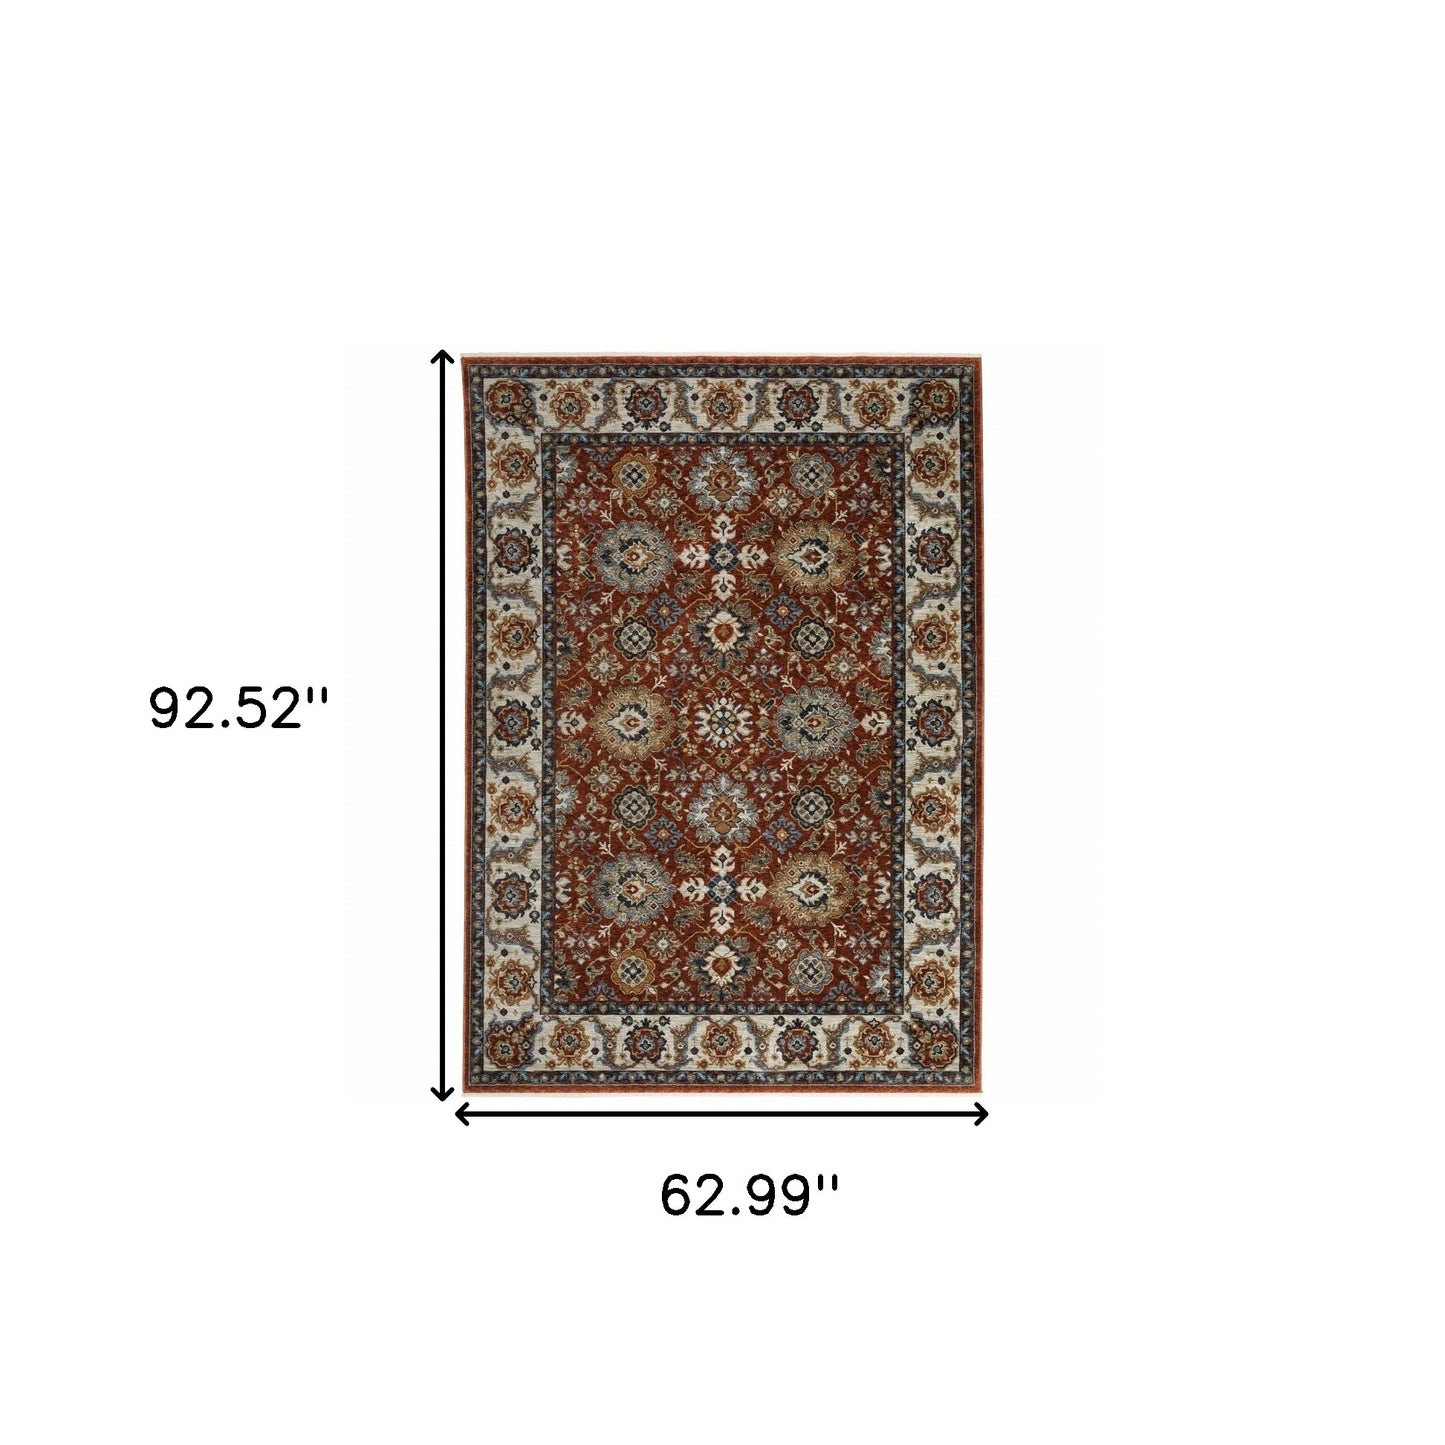 5' X 8' Red Blue Ivory Gold And Navy Oriental Power Loom Stain Resistant Area Rug With Fringe